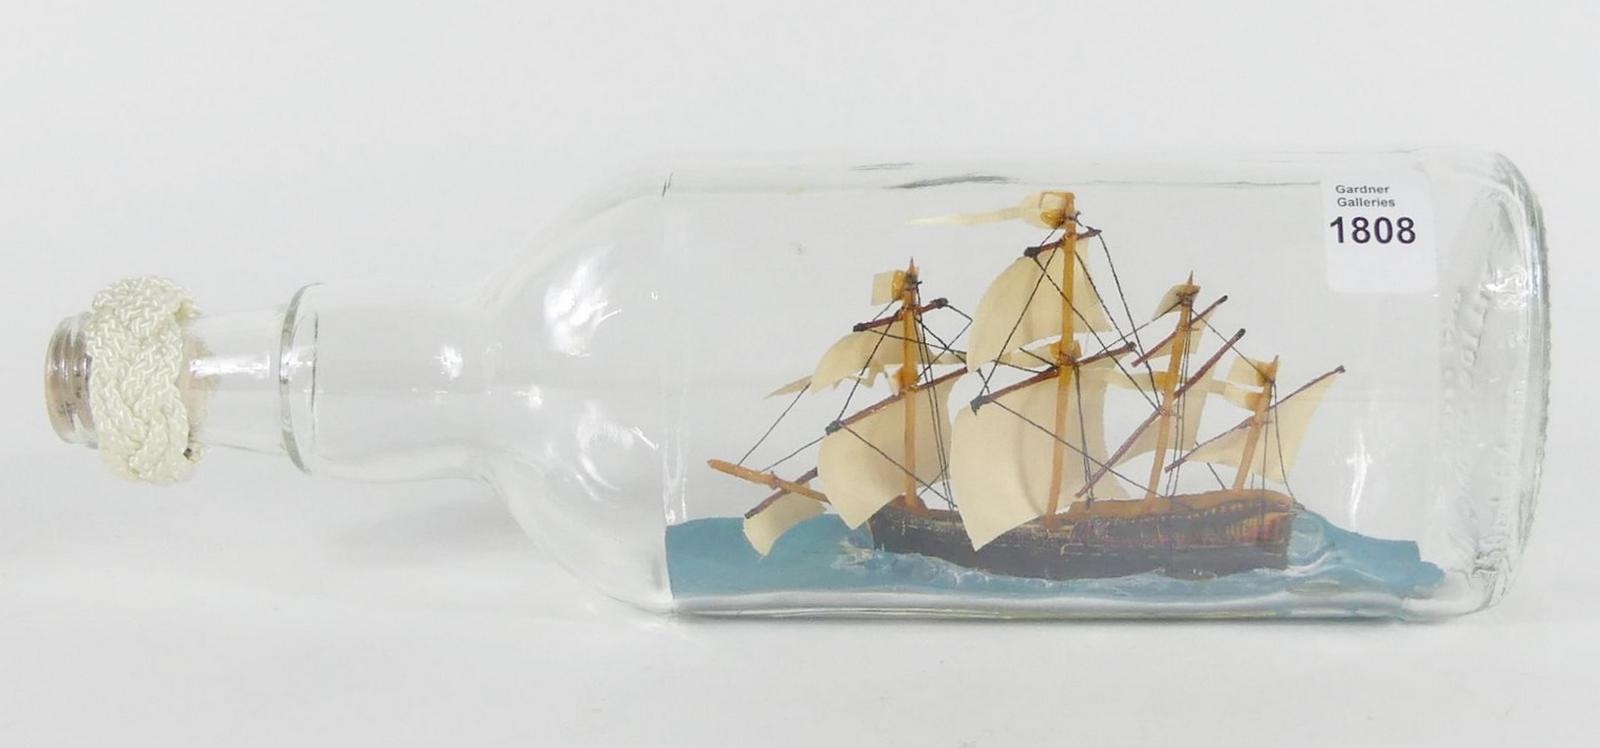 ENGLISH SHIP IN A BOTTLE